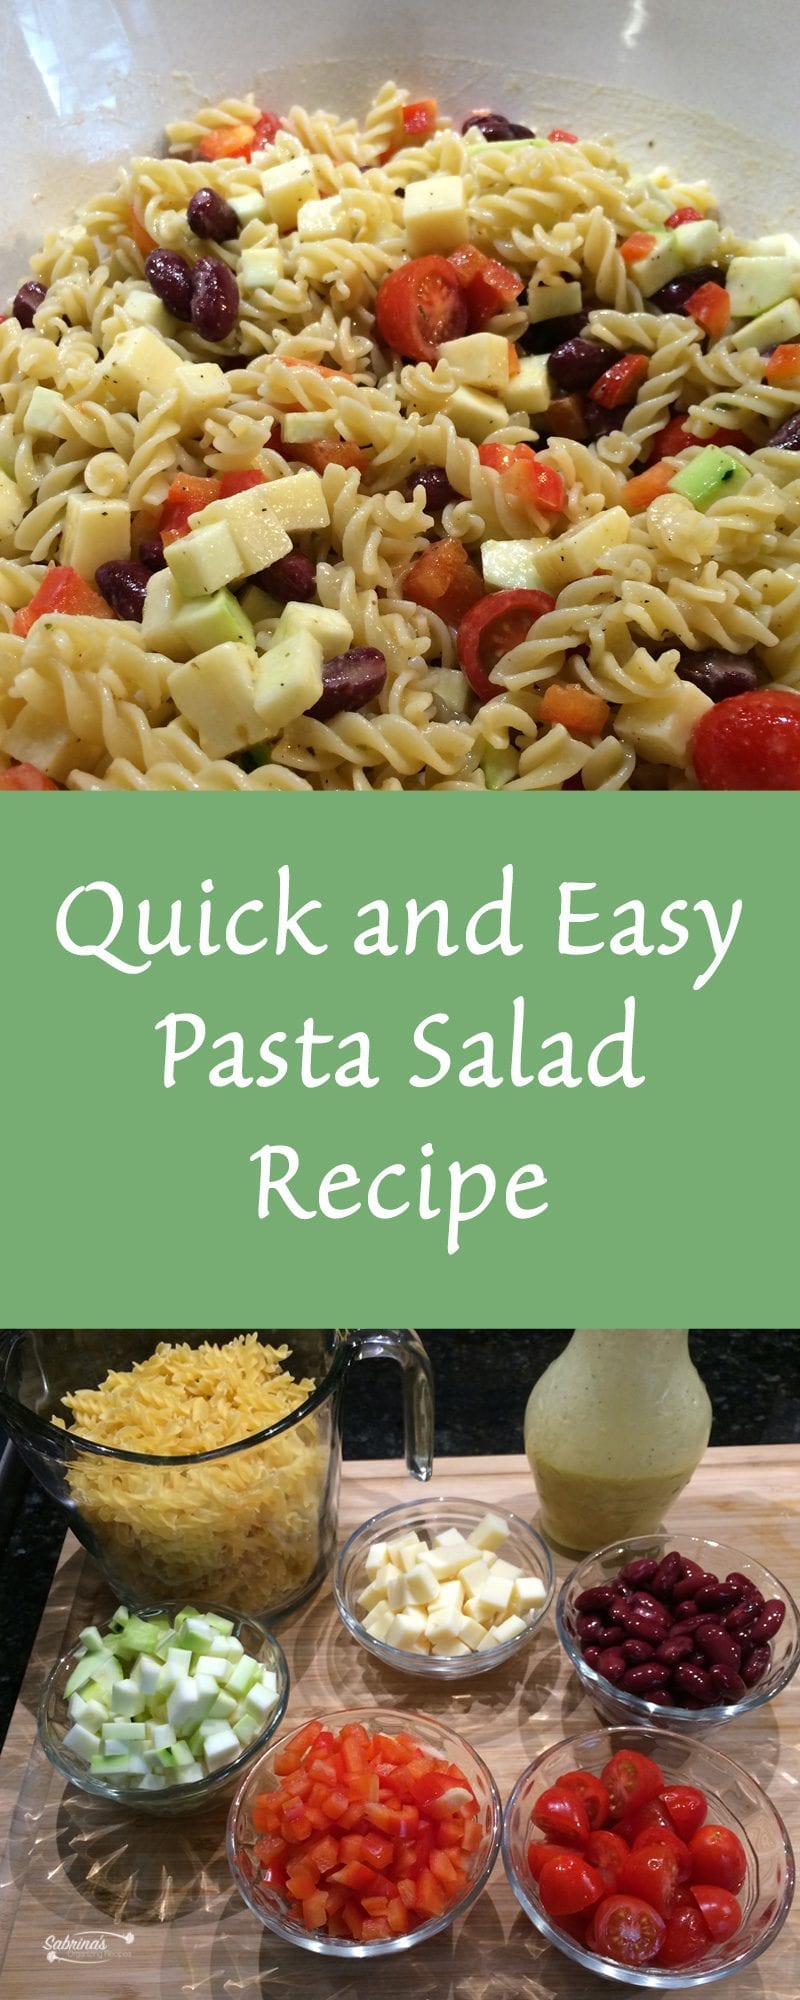 quick and easy pasta salad in the bowl